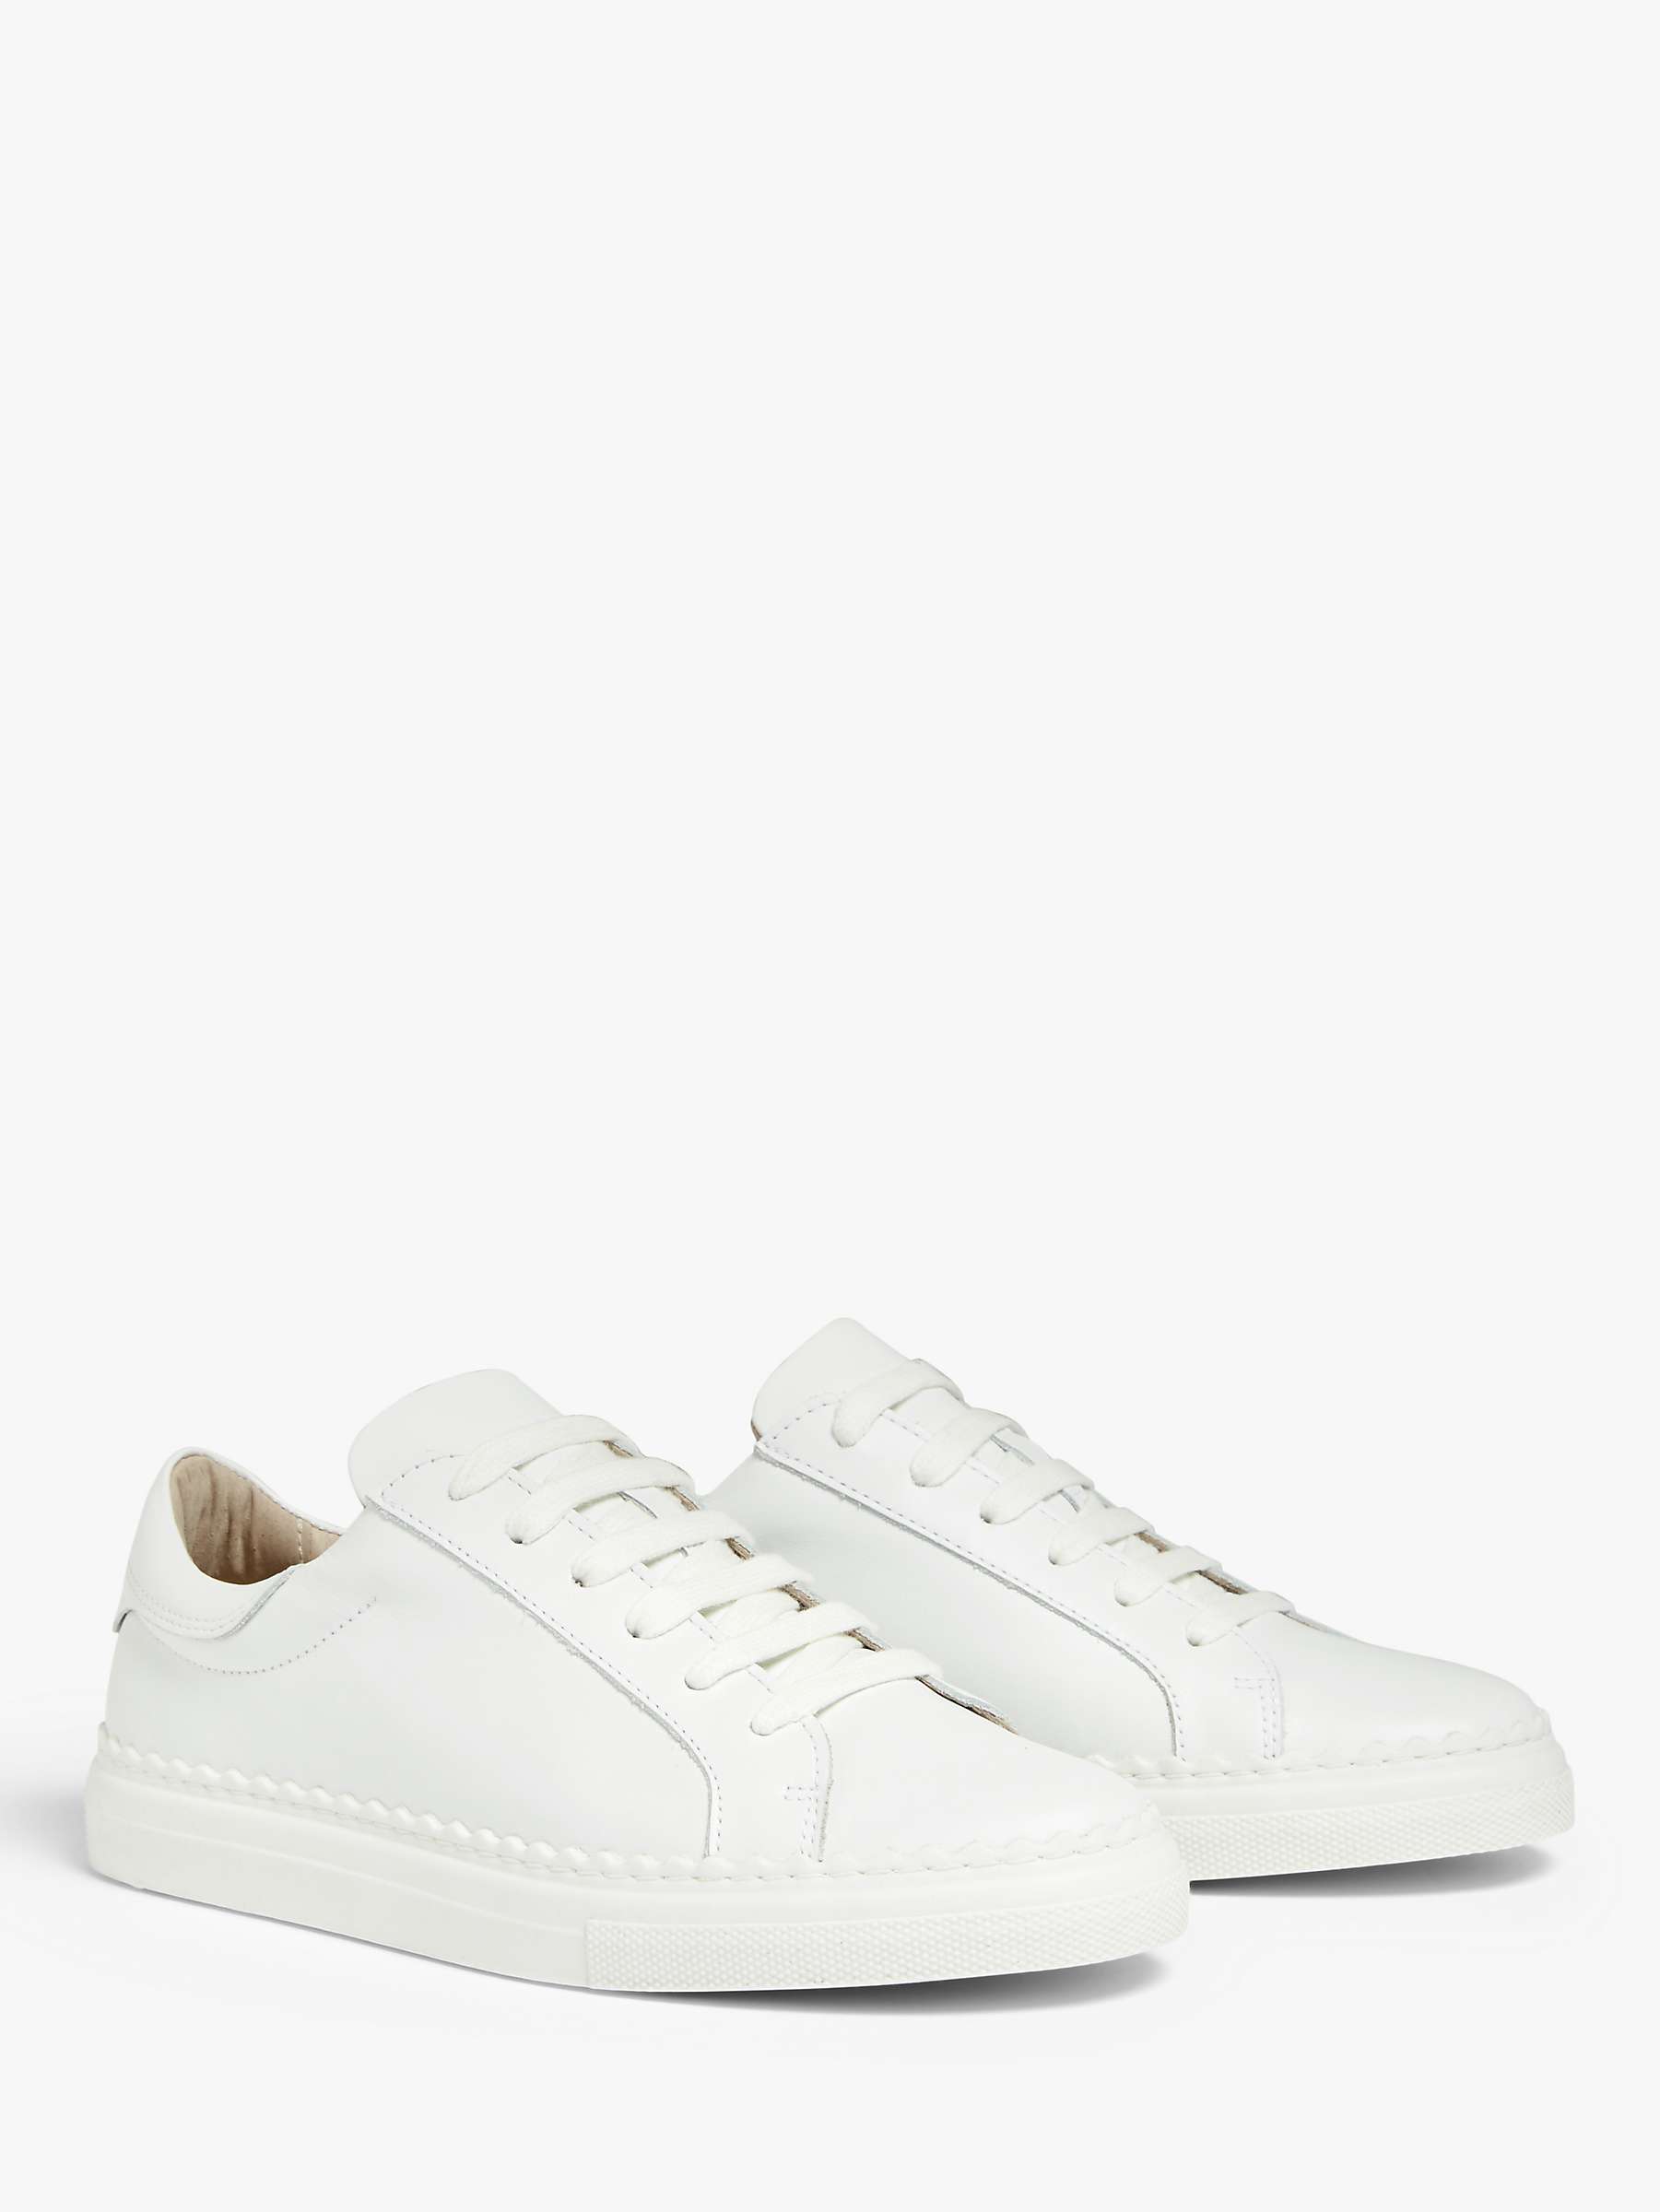 Buy John Lewis Fiona Scalloped Detail Leather Trainers, White Online at johnlewis.com